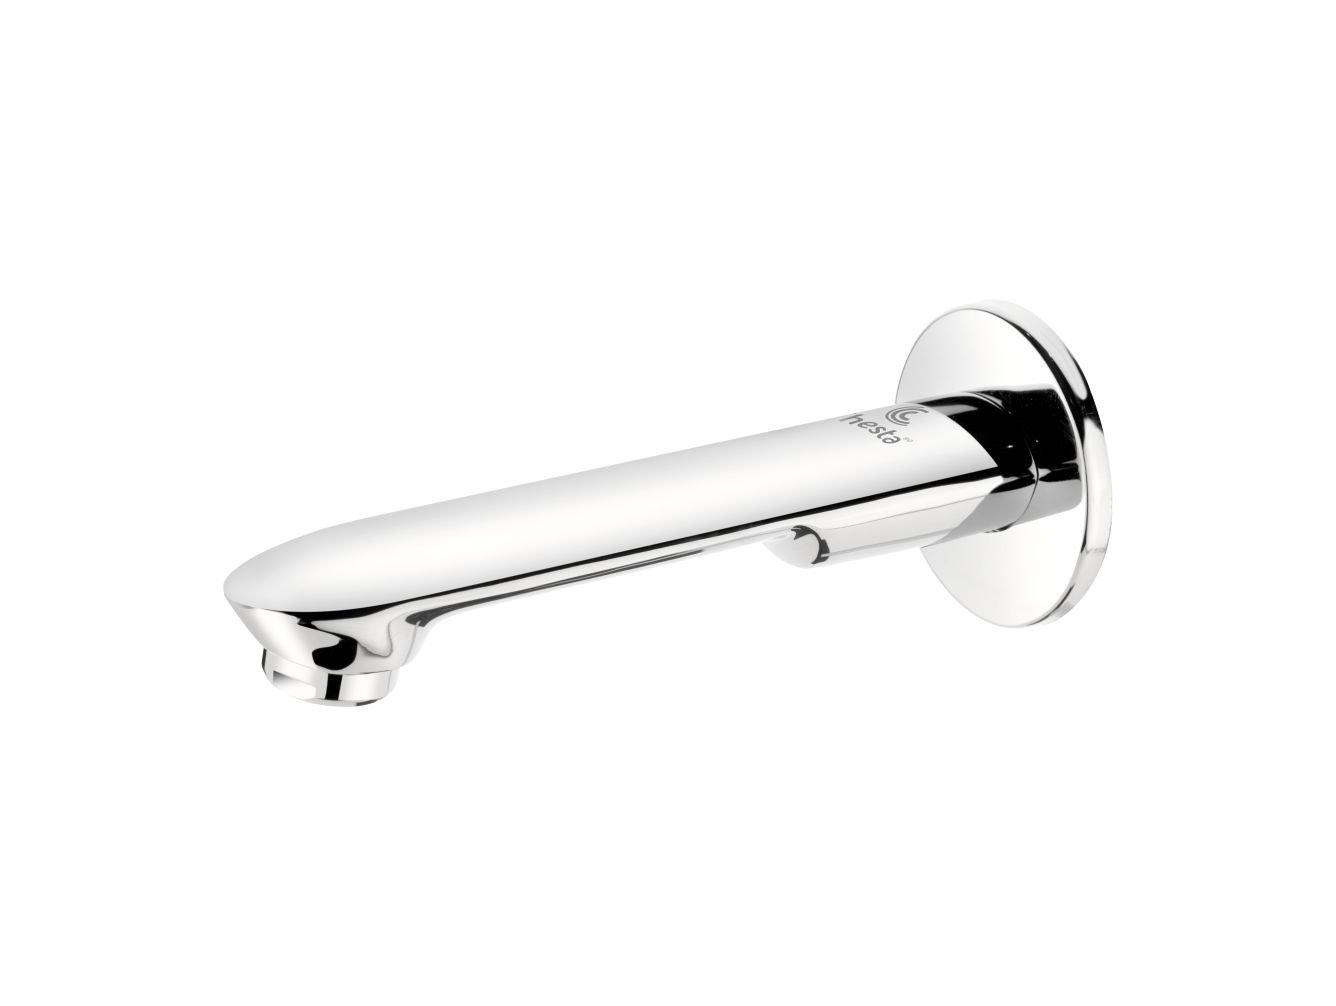 MO - 1017 - Diverter Spout with Wall Flange by Chesta Bath